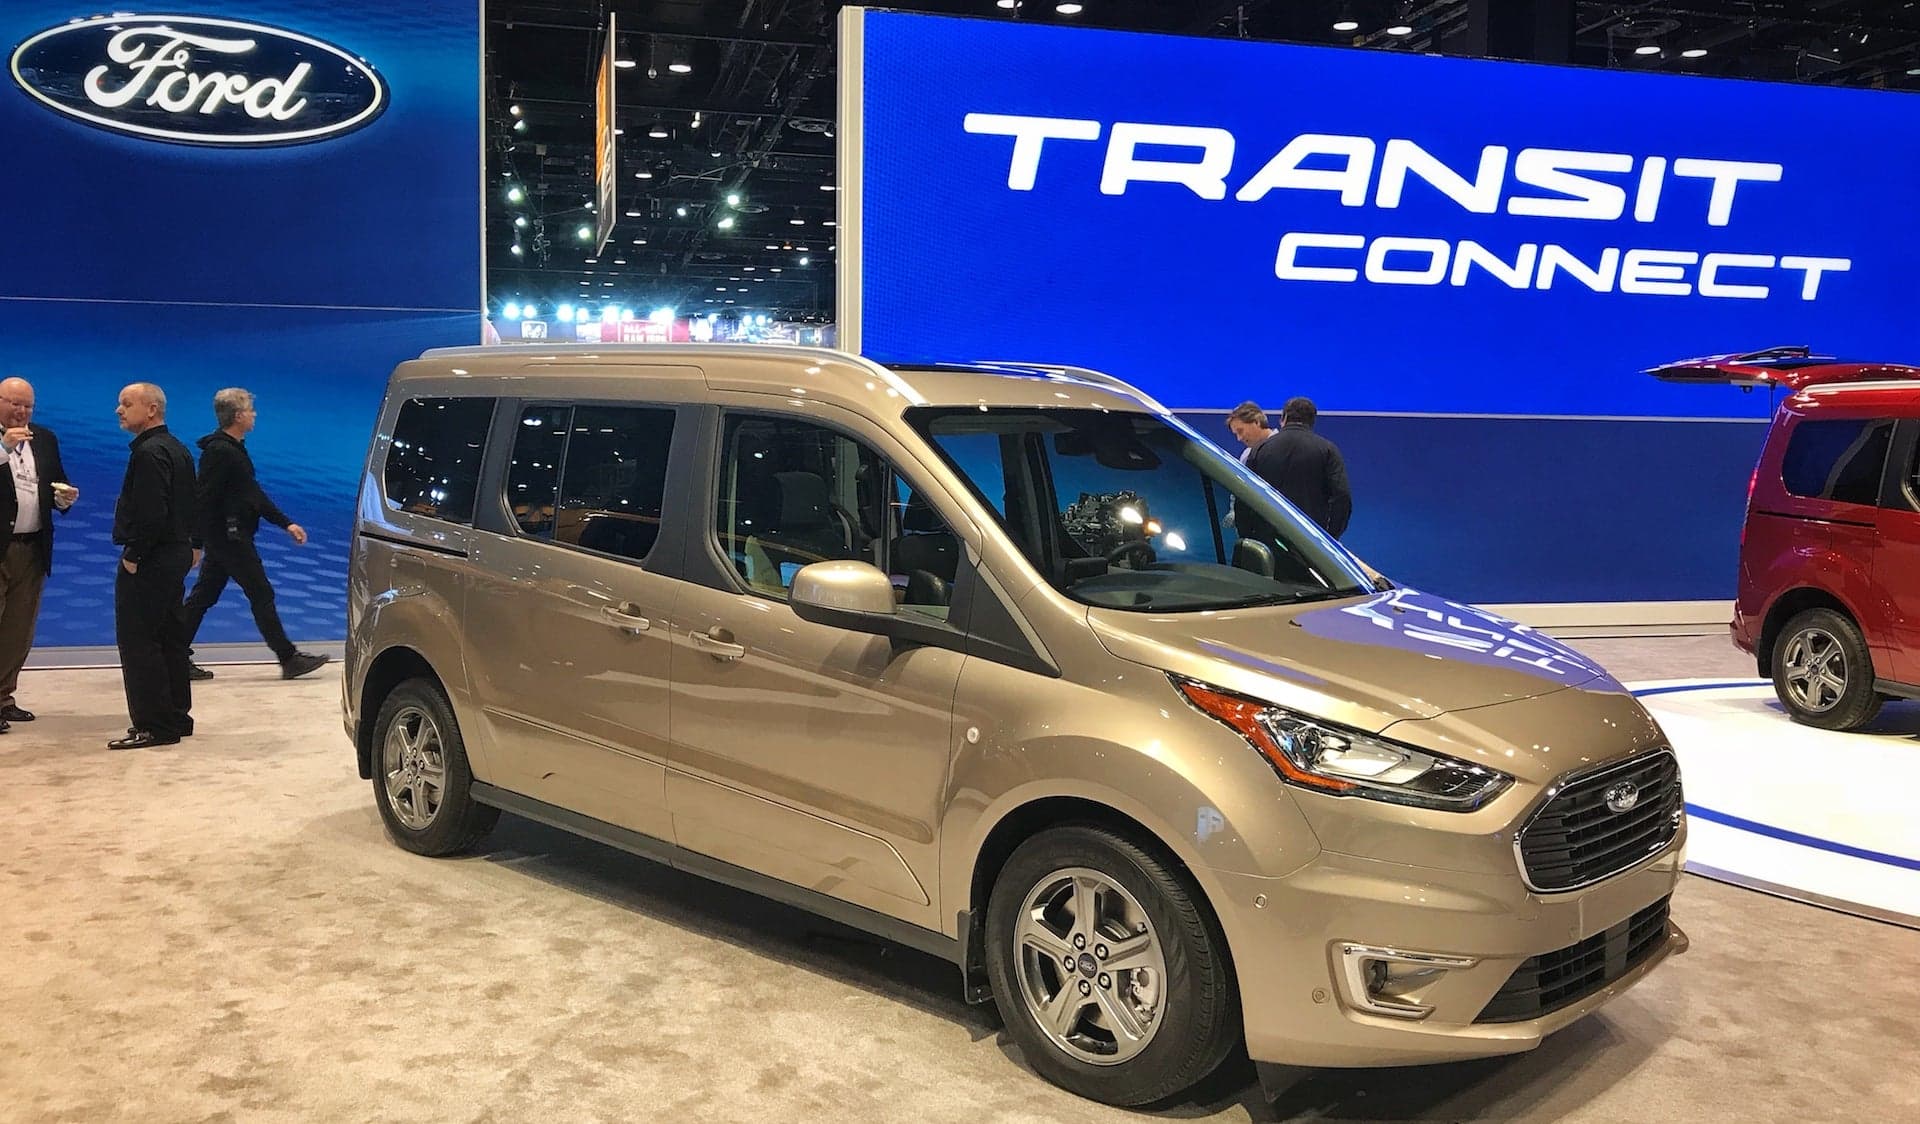 Ford Shows off the New 2019 Transit Connect Wagon in Chicago